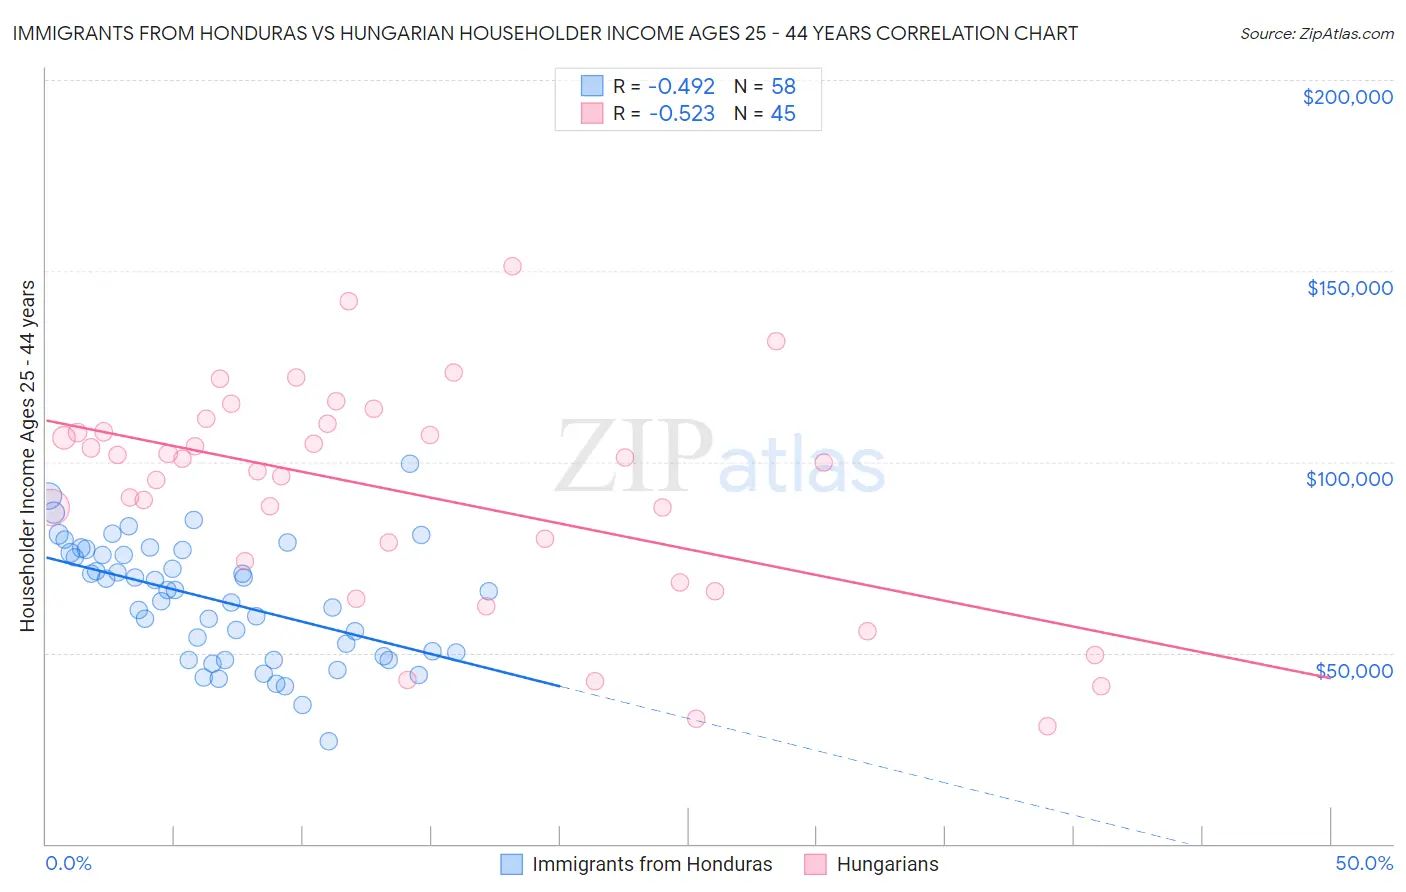 Immigrants from Honduras vs Hungarian Householder Income Ages 25 - 44 years